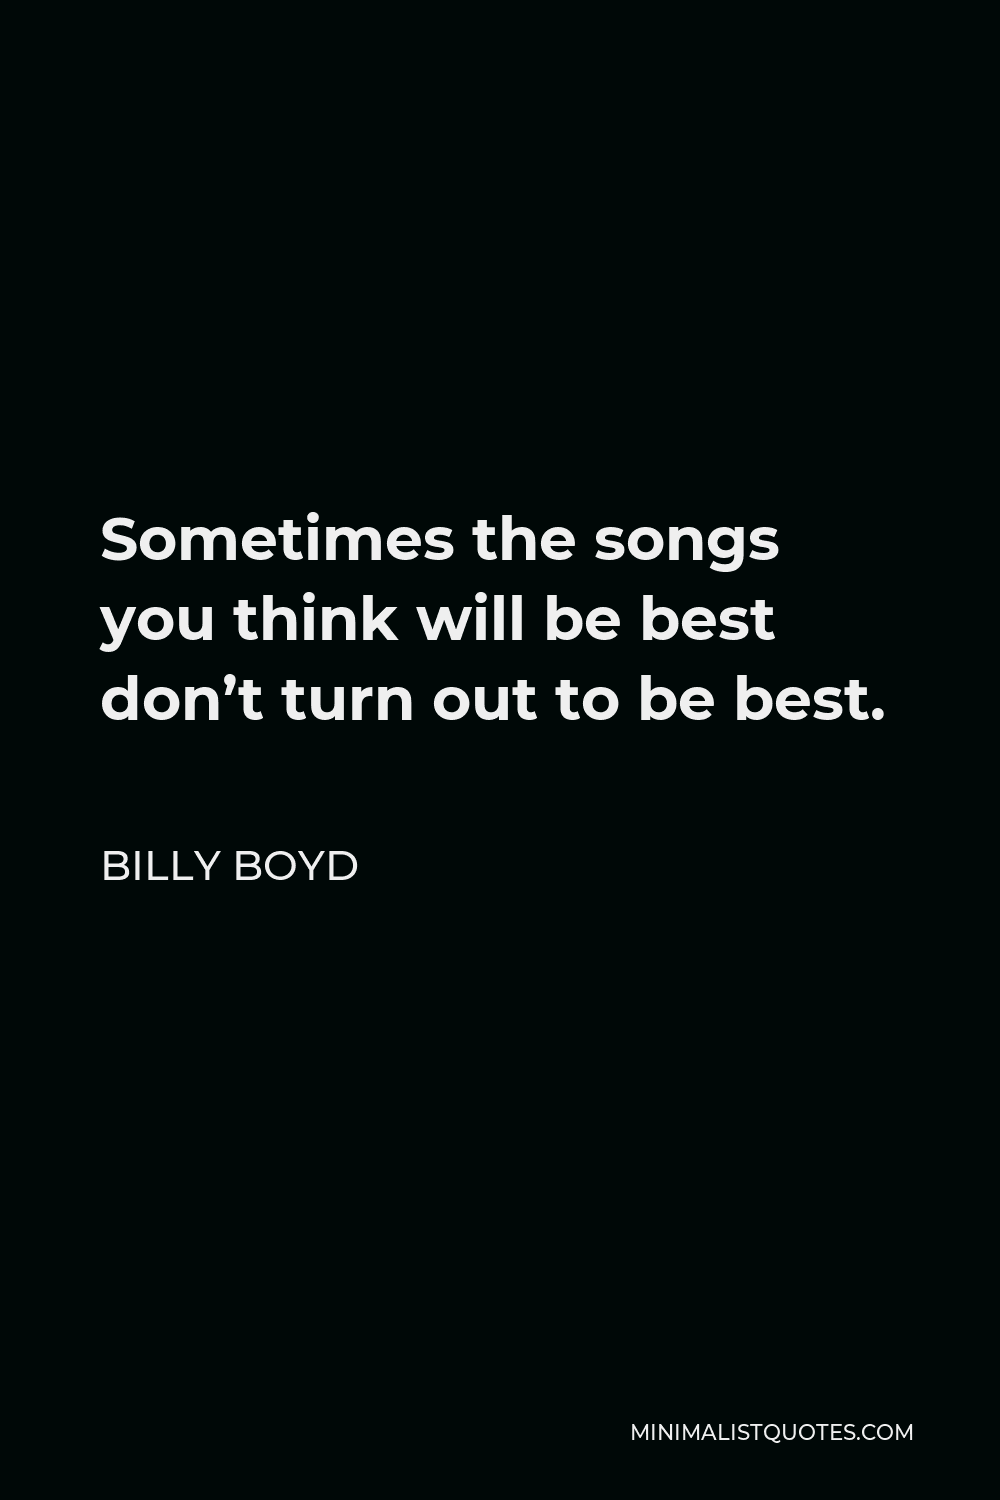 Billy Boyd Quote - Sometimes the songs you think will be best don’t turn out to be best.